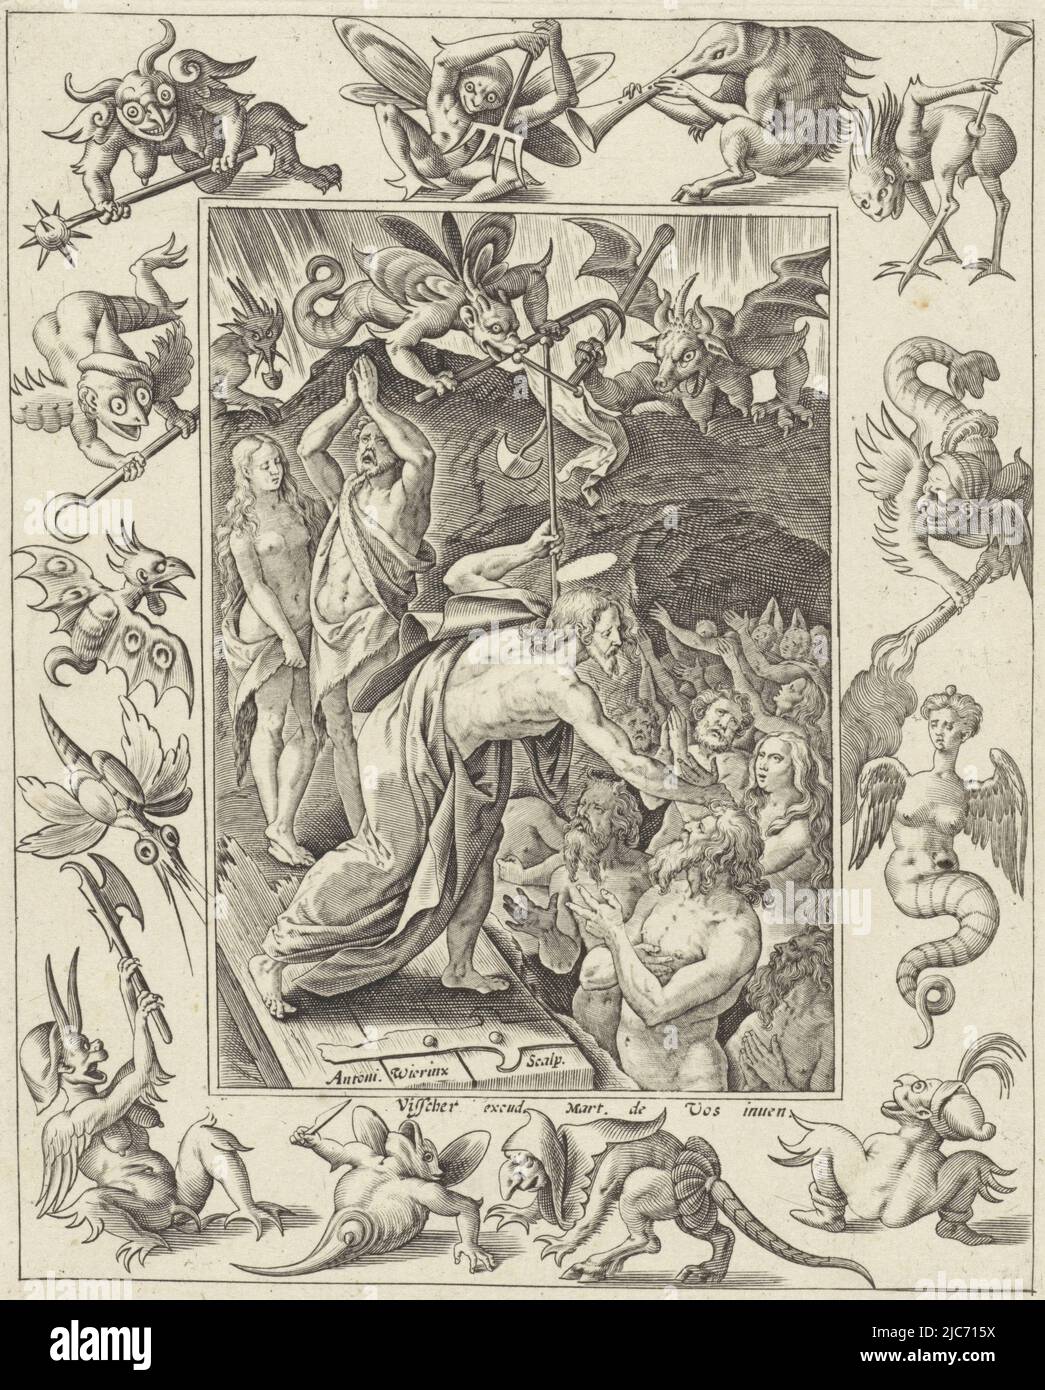 After his death, Christ descends into limbo. At the gates of hell, he reaches out to anonymous figures. Three devils look on. The scene is framed in an ornamental frame decorated with several devils. Christ in Limbo Passion of Christ , print maker: Antonie Wierix (II), (mentioned on object), Maerten de Vos, (mentioned on object), publisher: Claes Jansz. Visscher (II), (mentioned on object), print maker: Antwerp, publisher: Amsterdam, 1582 - 1586, paper, engraving, h 190 mm × w 149 mm Stock Photo